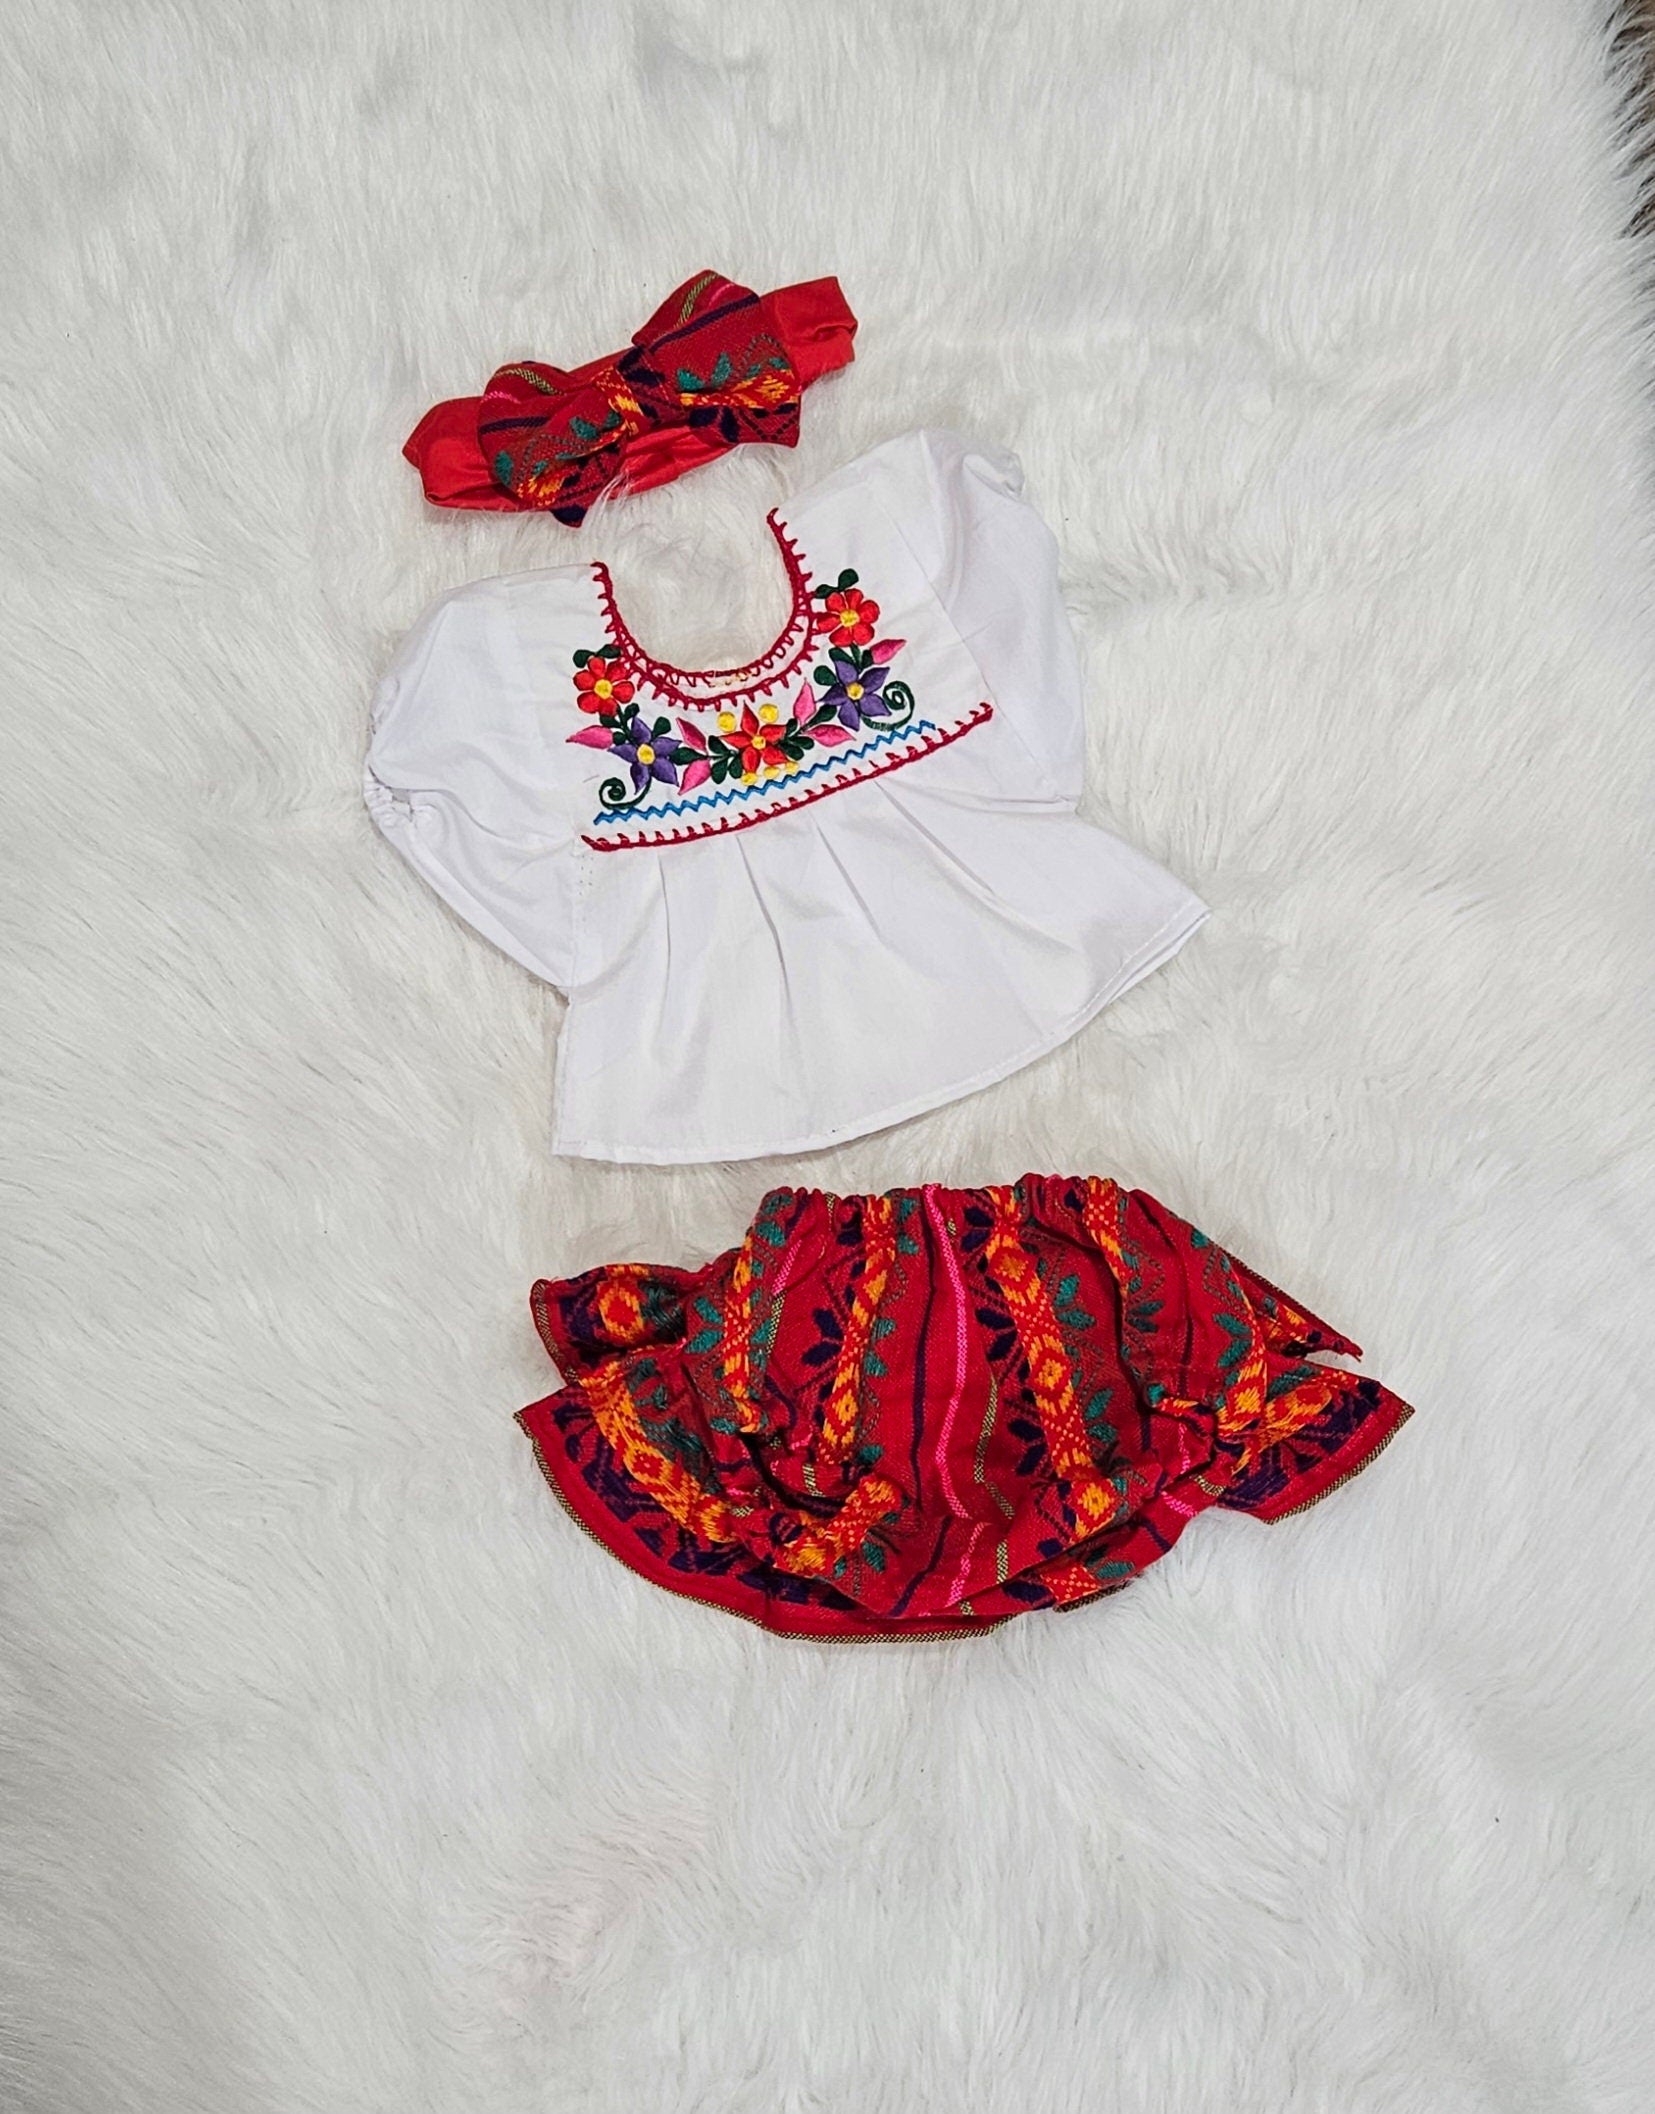 Baby mexican outfit//Taco-bout party outfit//Fiesta outfit//Mexican bloomers/Serape//taco twosday party//ruffles//baby mexican set outfit//